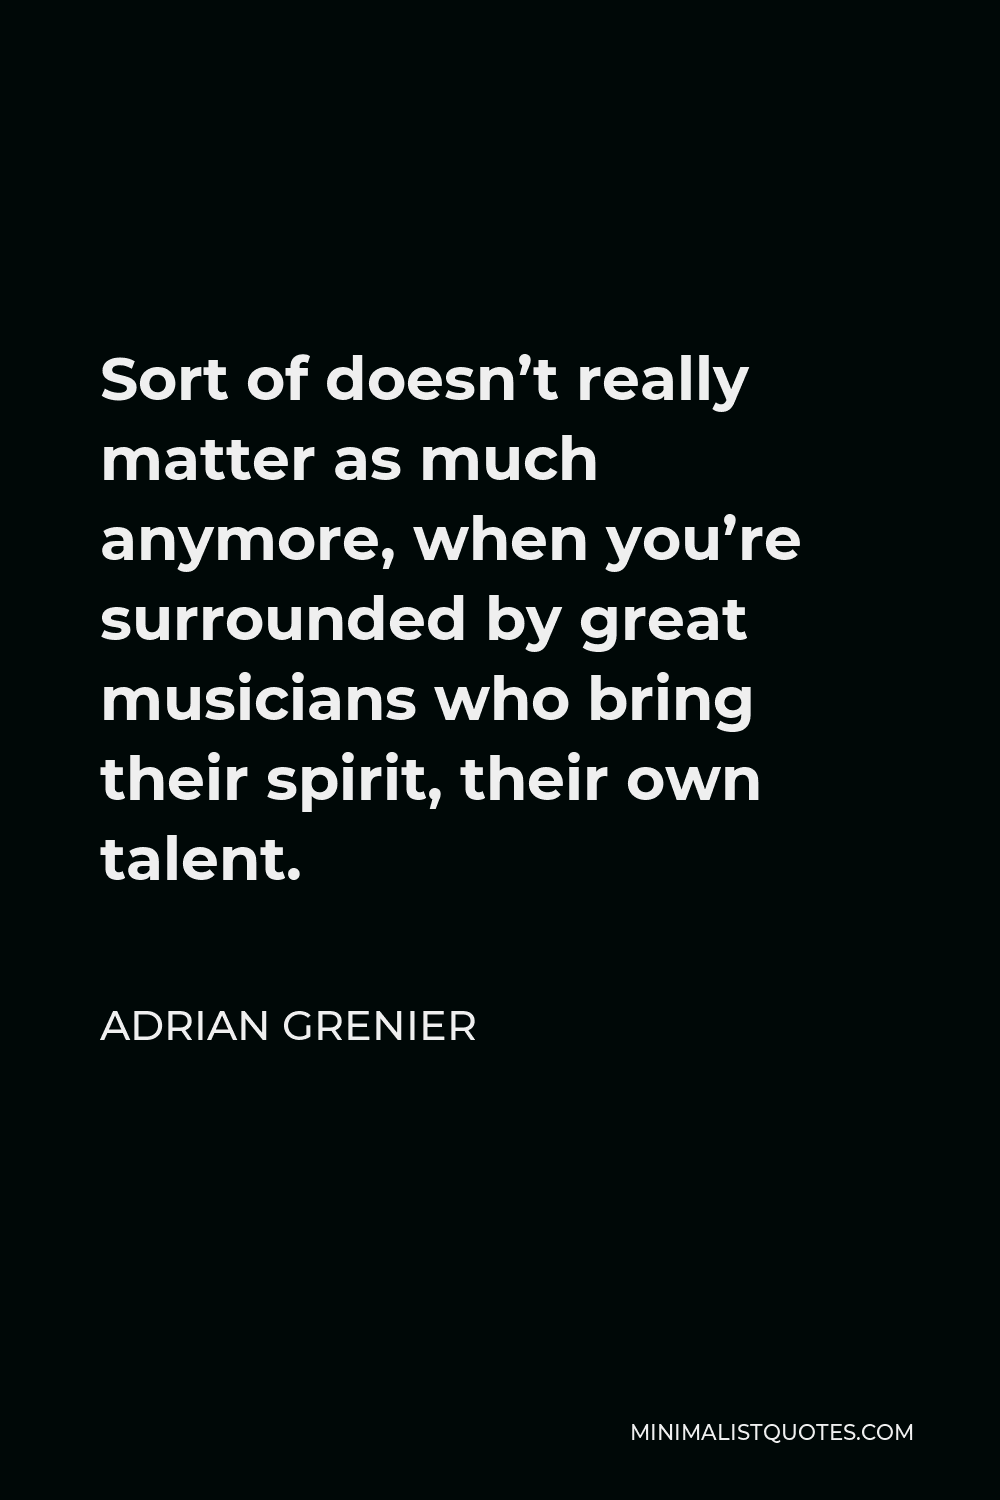 Adrian Grenier Quote - Sort of doesn’t really matter as much anymore, when you’re surrounded by great musicians who bring their spirit, their own talent.